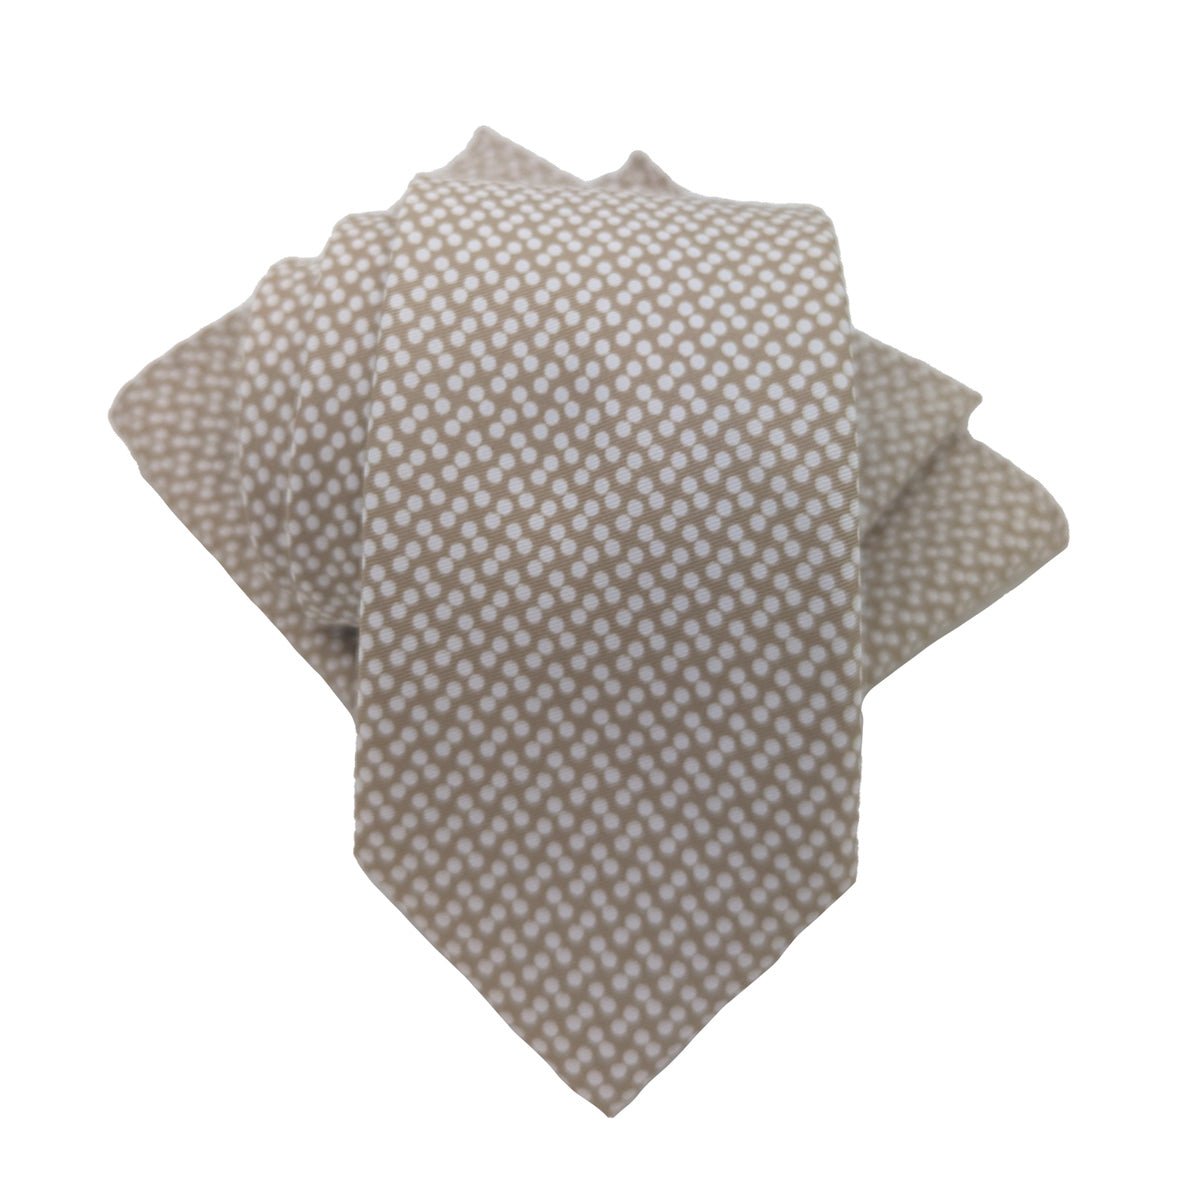 Champagne Dotty Pocket Square - Wedding Pocket Square - - Swagger & Swoon